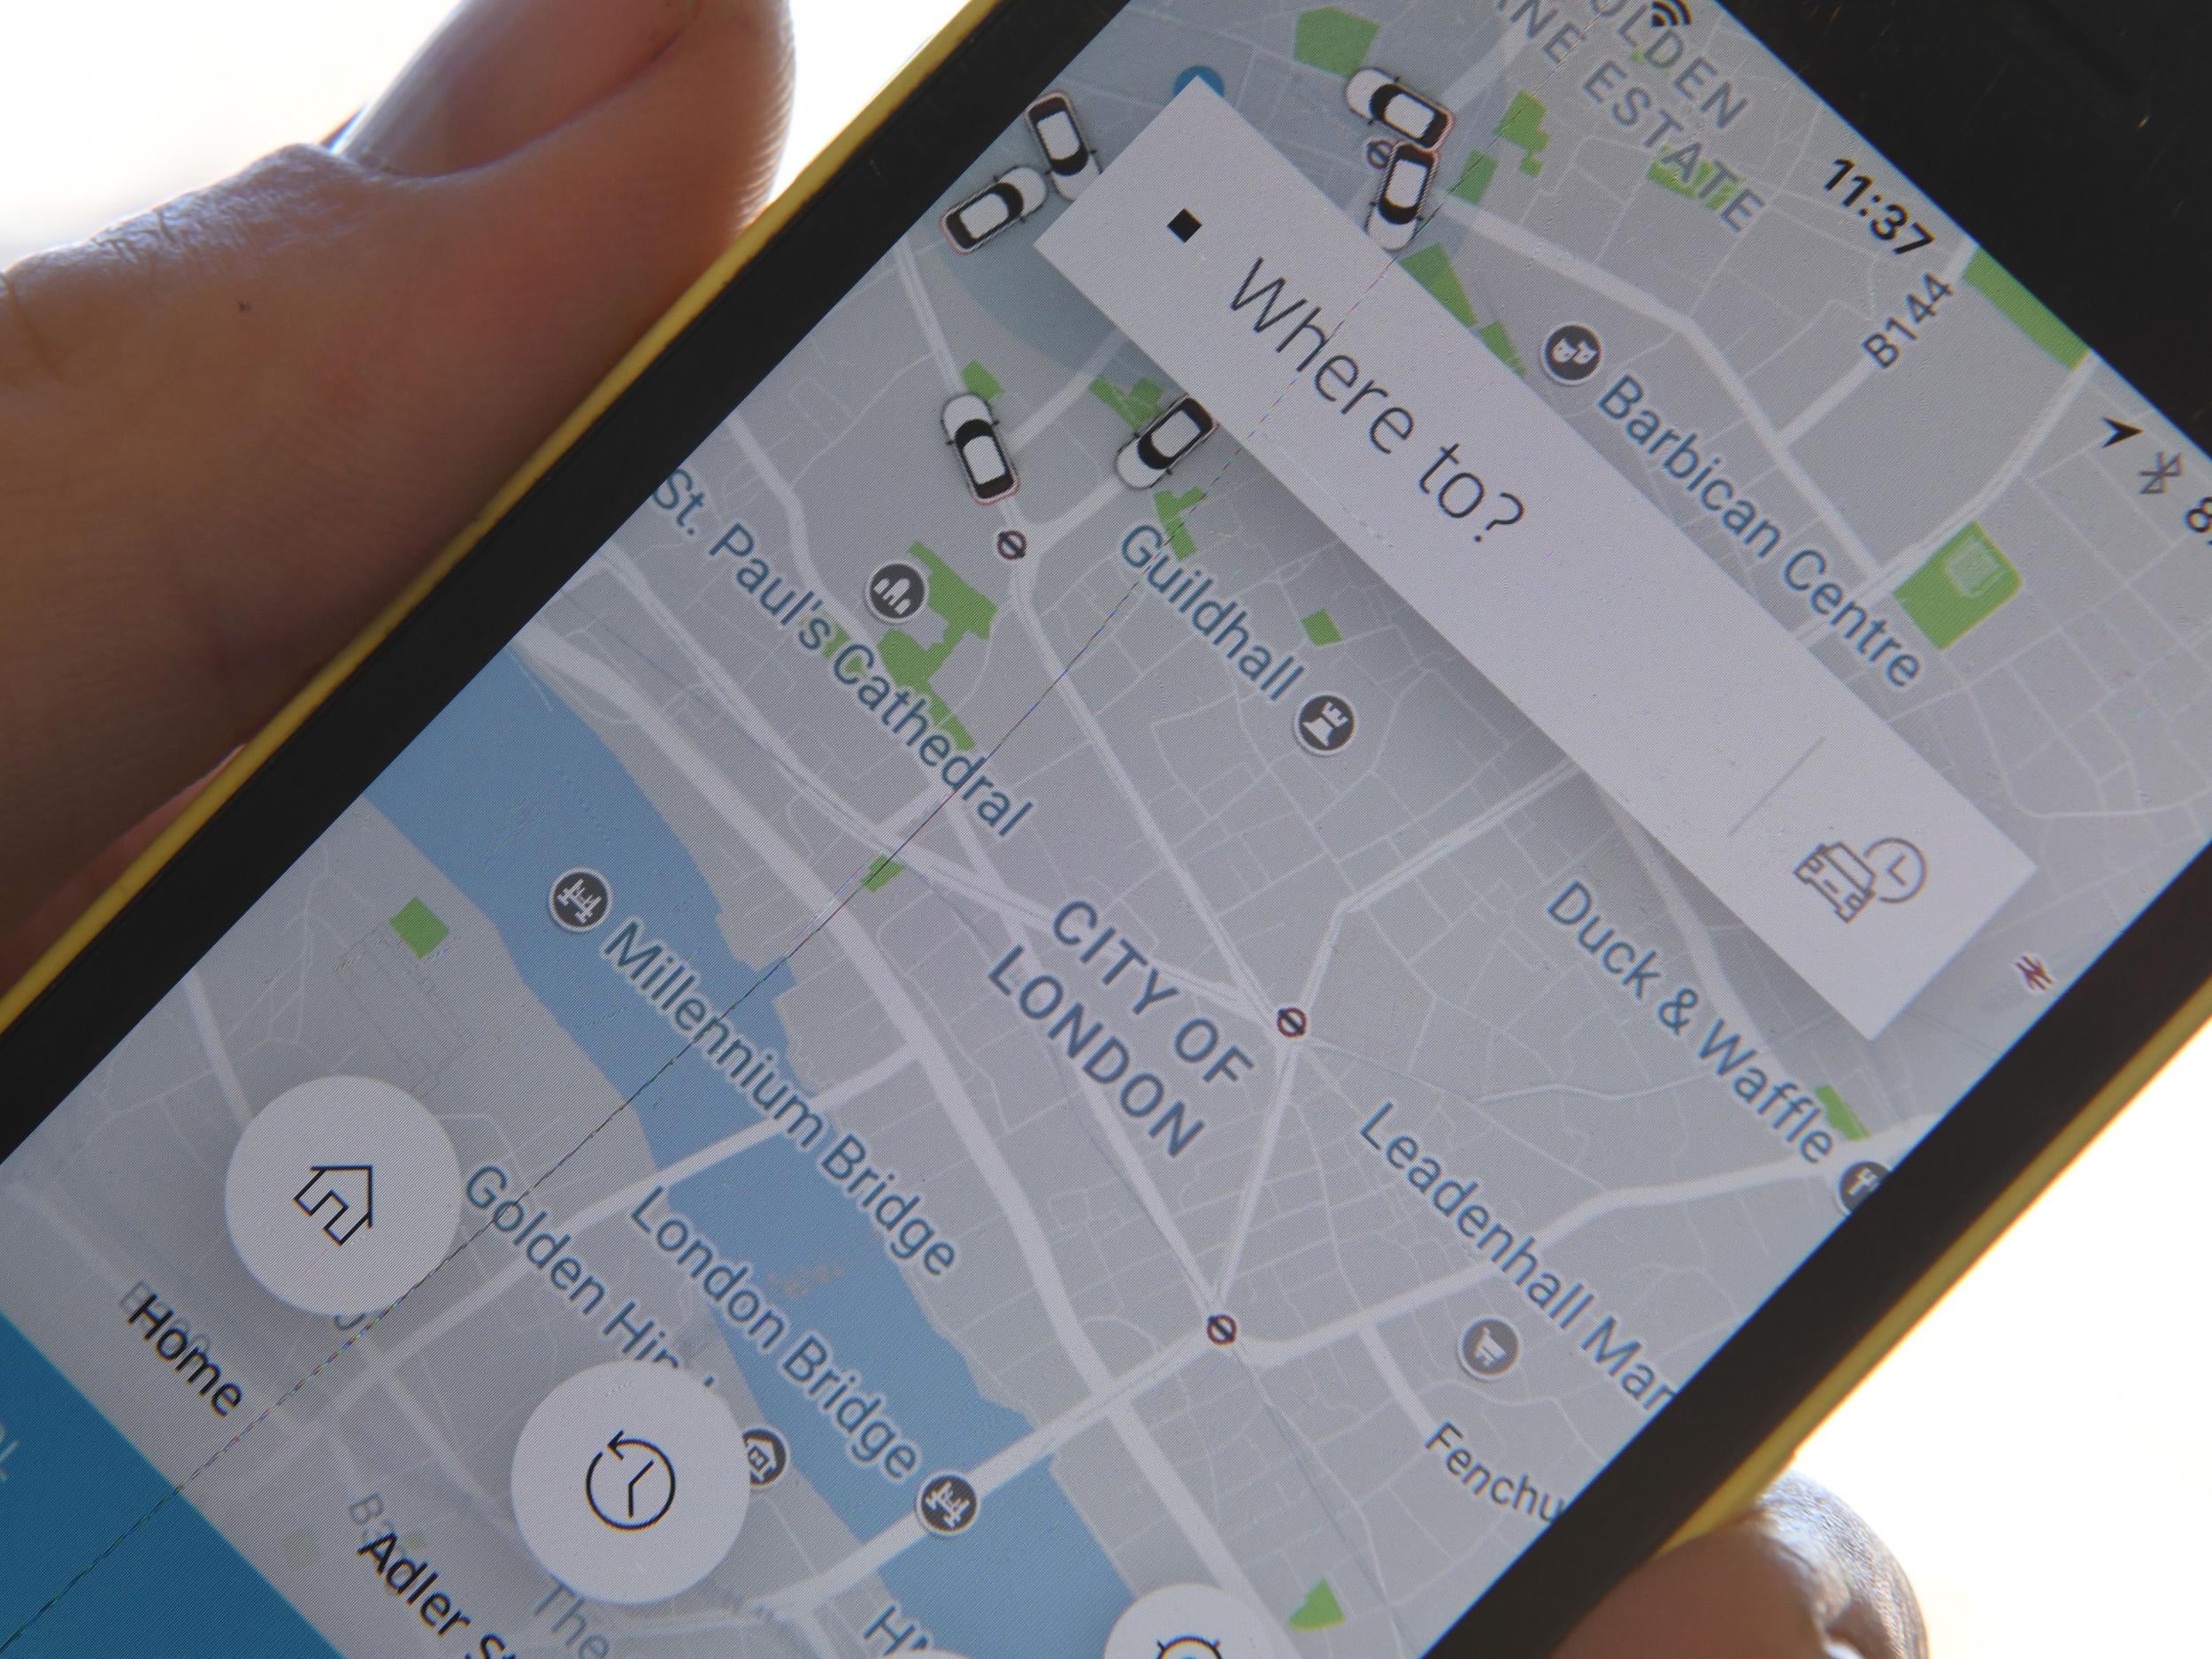 Uber employs around 40,000 drivers in London servicing an estimated 3.5 million people